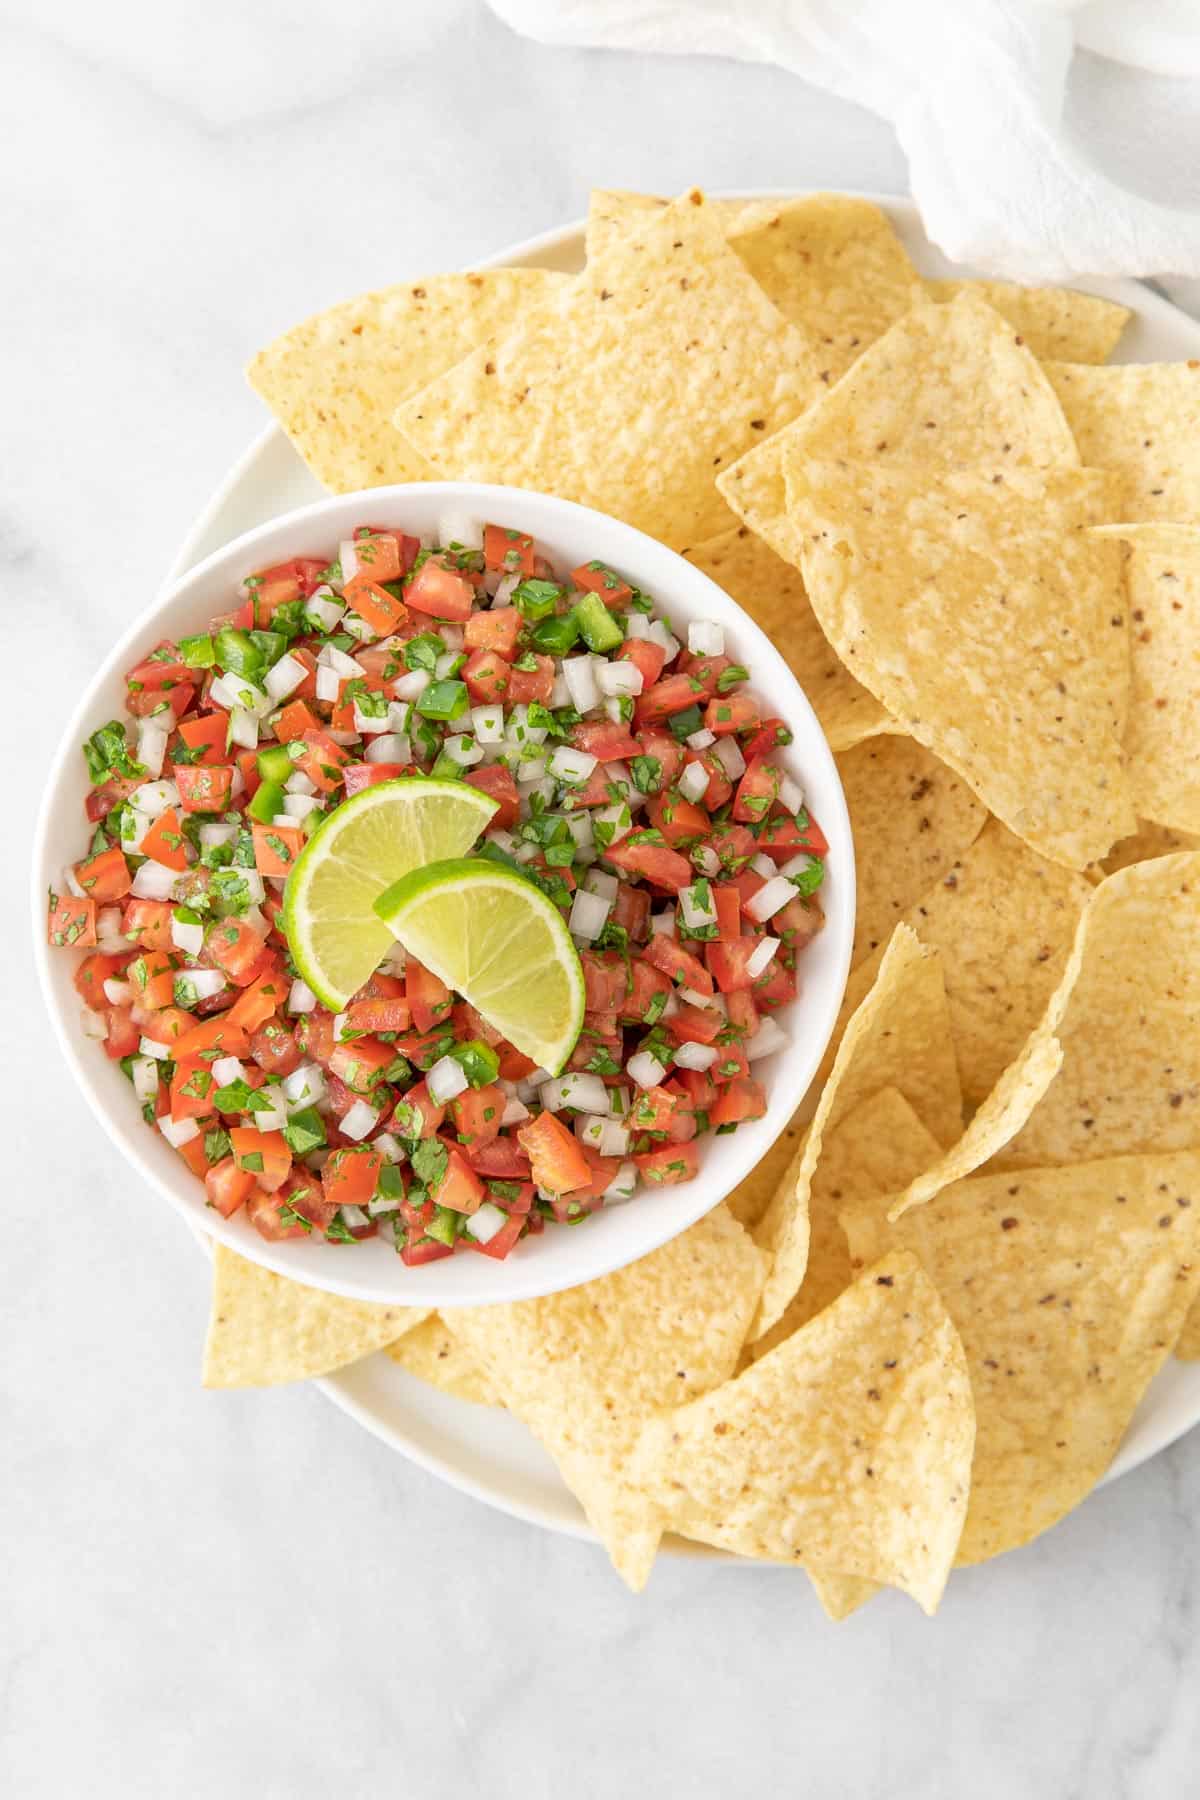 Overhead view of Pico de Gallo in a white bowl on a round plate with tortilla chips.